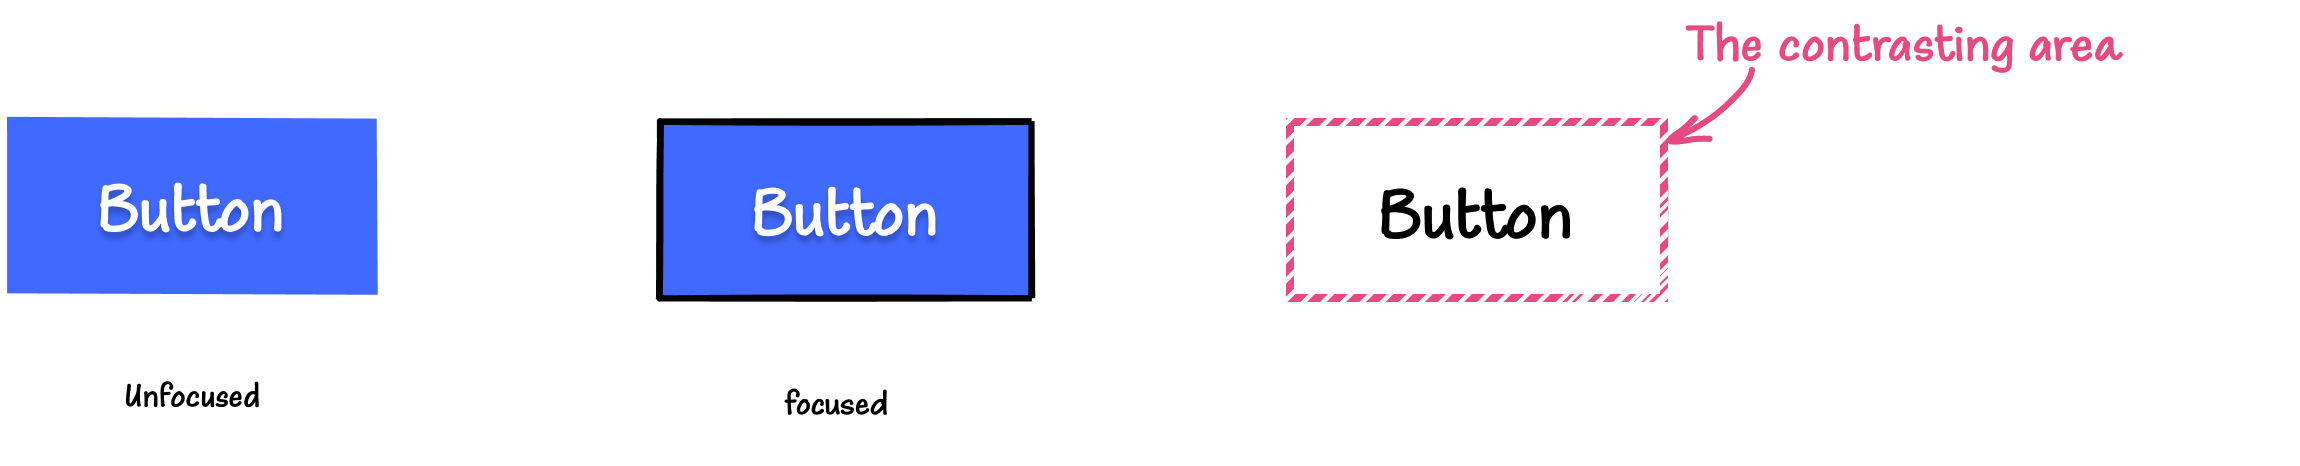 Illustration: On the left is a blue button with a white label in its default, unfocused state. In the middle is the button in its focused state, having a border. On the right, is a button with with a pattern applied along its border, indicating that this patterned area is the contrasting area.